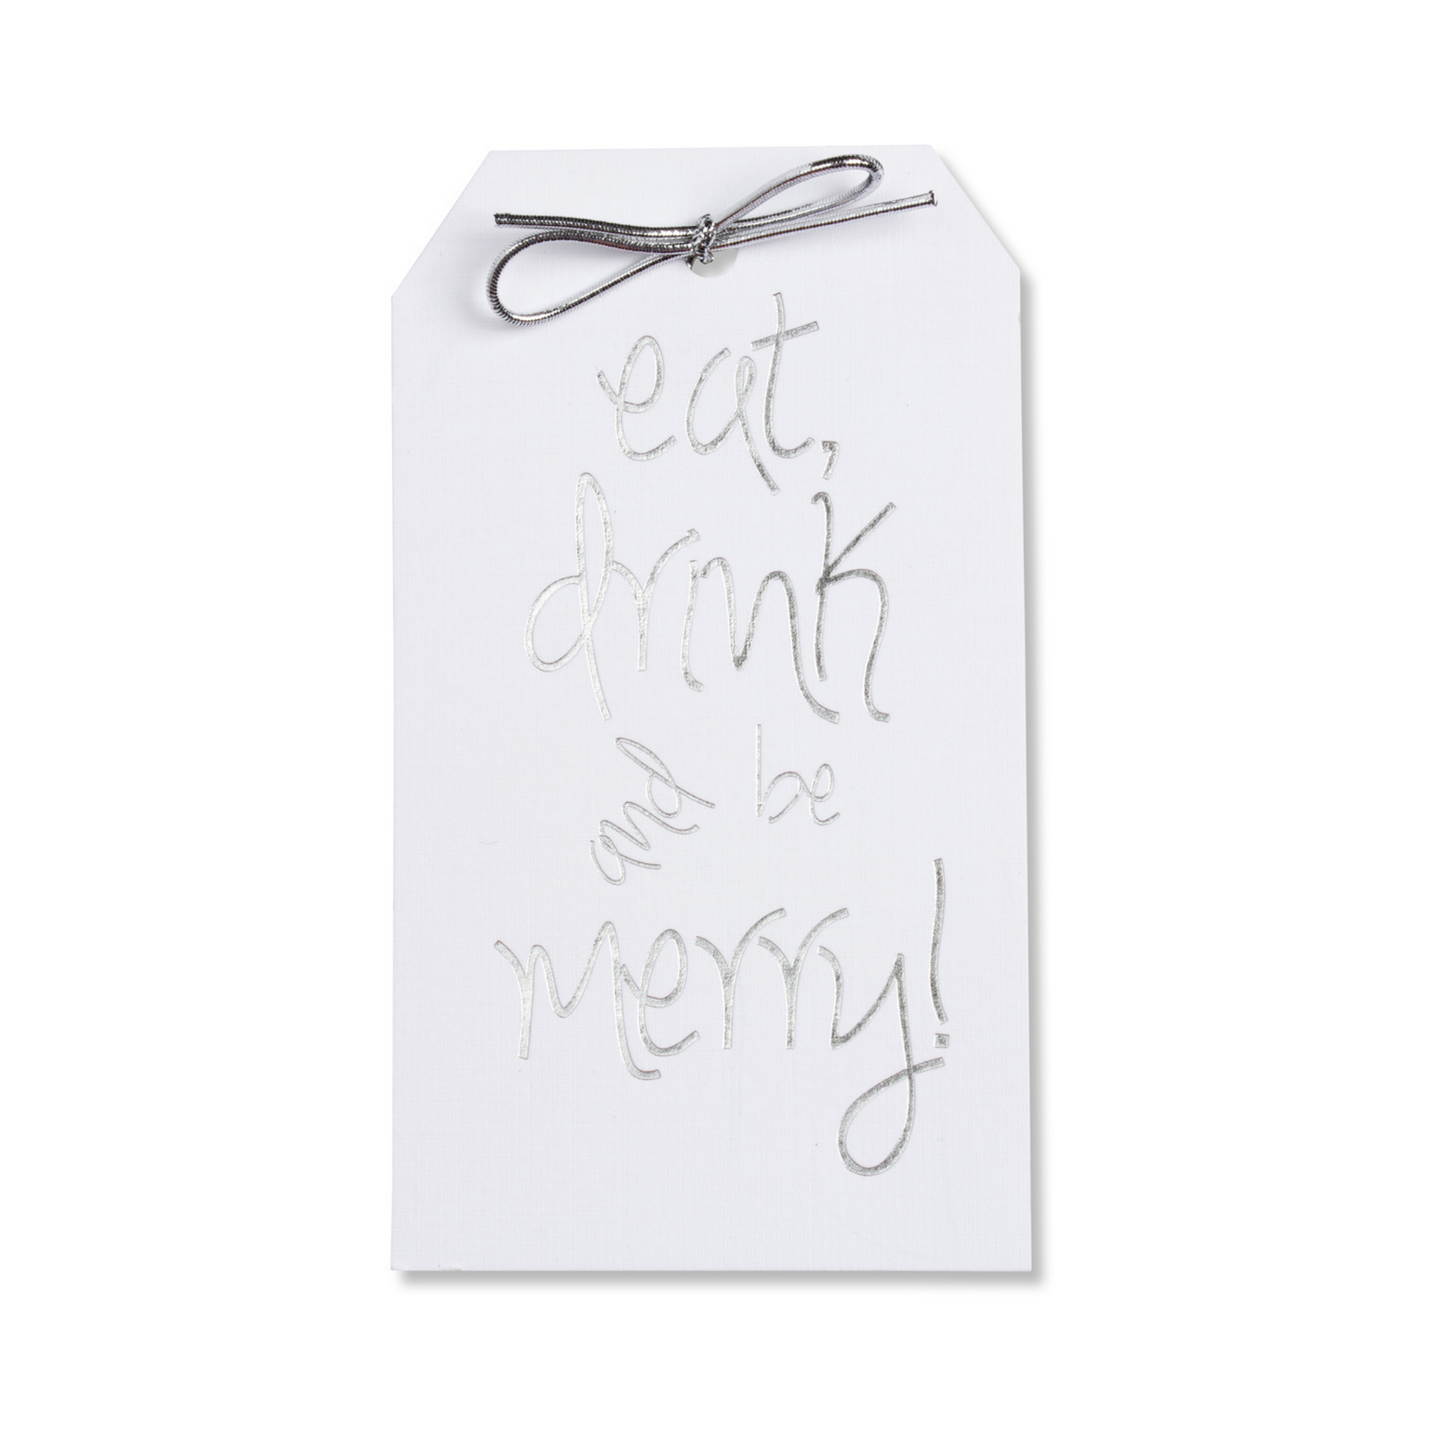 Silver foil Eat drink and be Merry! Gift tags on white paper. These tags come with silver metallic ties. They are a large size